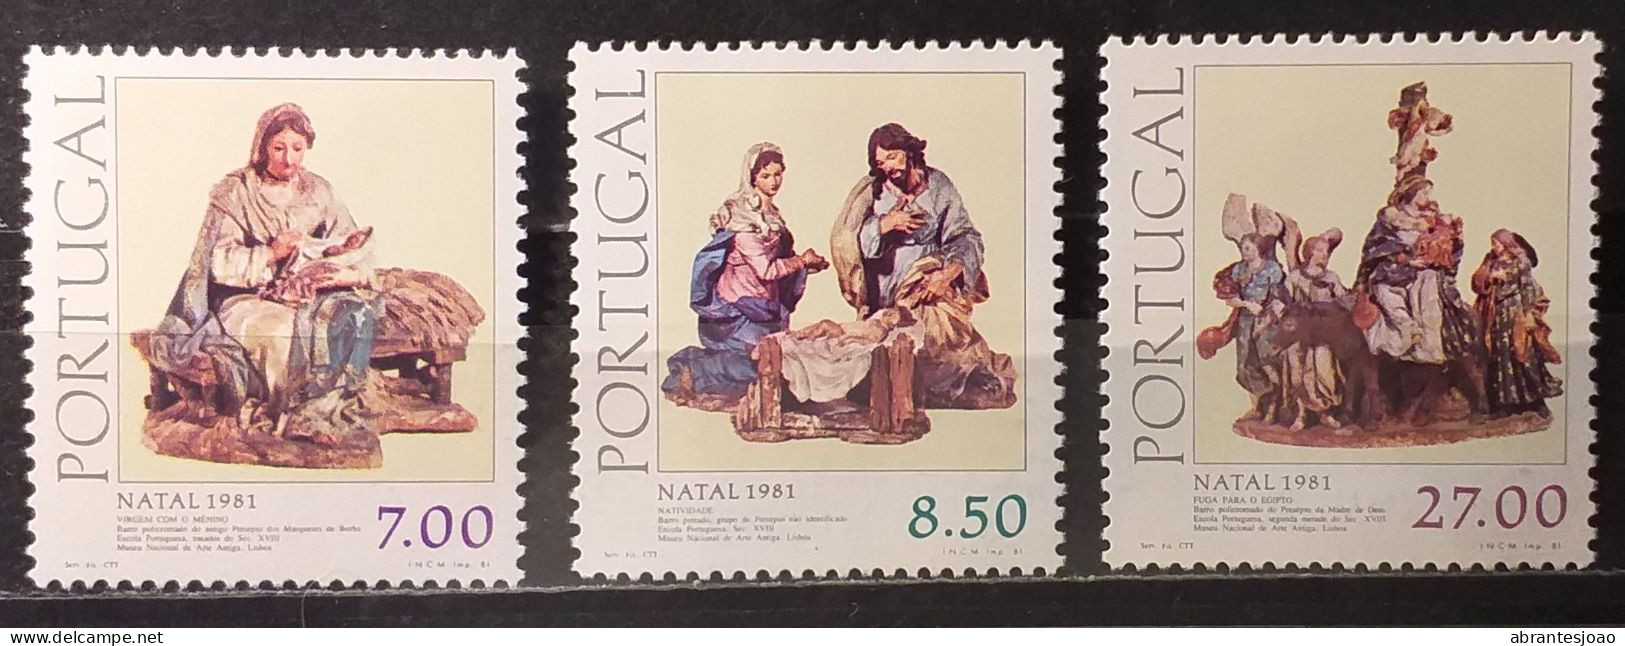 1981 - Portugal - MNH - 5th. Centenary Of Access Of King John II To The Throne + Christmas - 5 Stamps - Ungebraucht